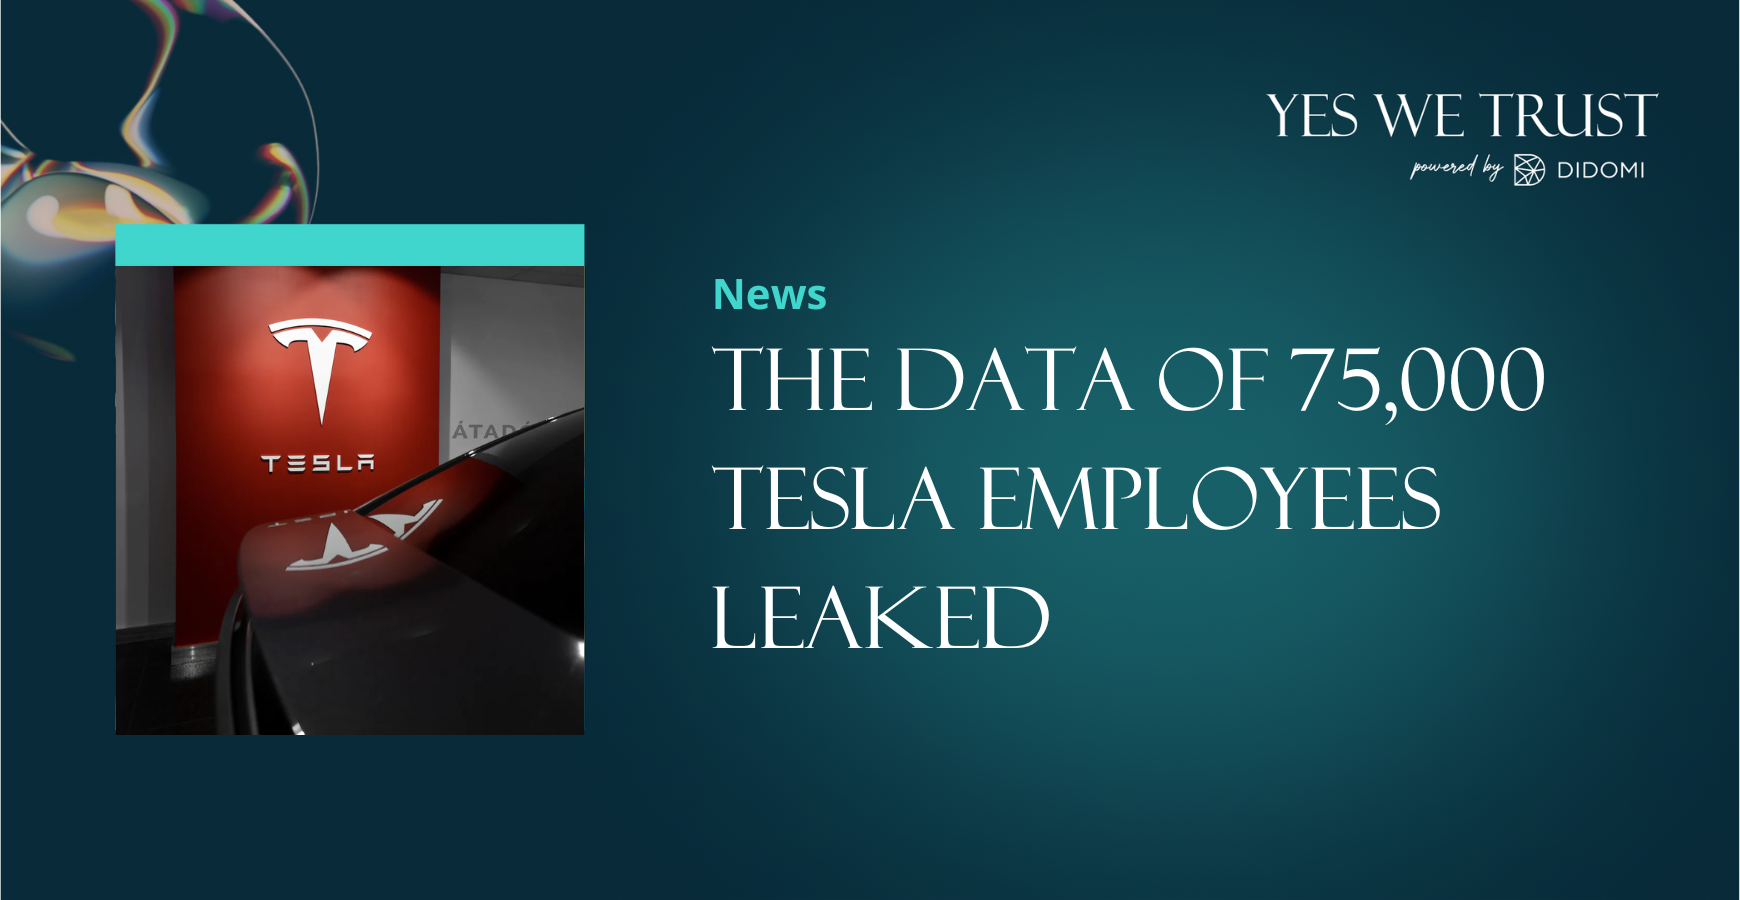 Tesla’s insider wrongdoing leads to data breach of 75000 employees